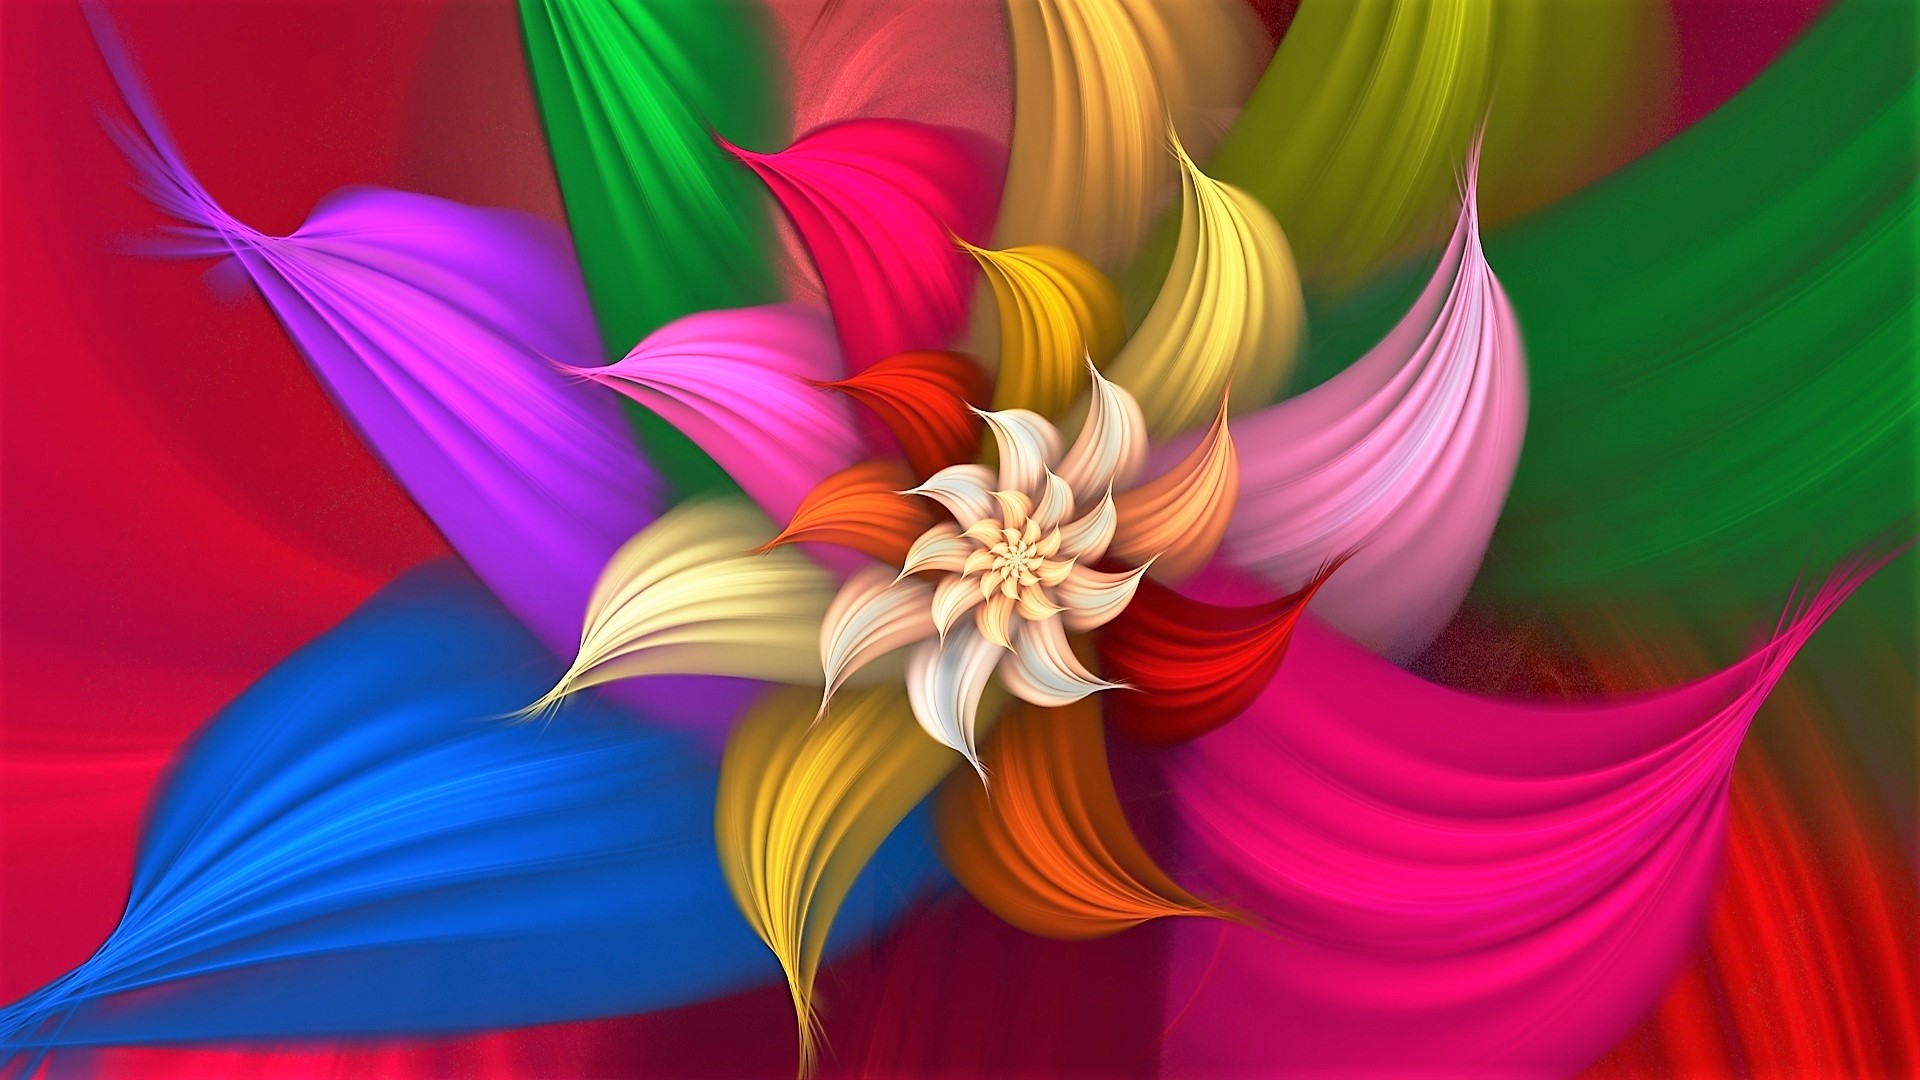 Abstract Colorful Colors Flower 1920x1080